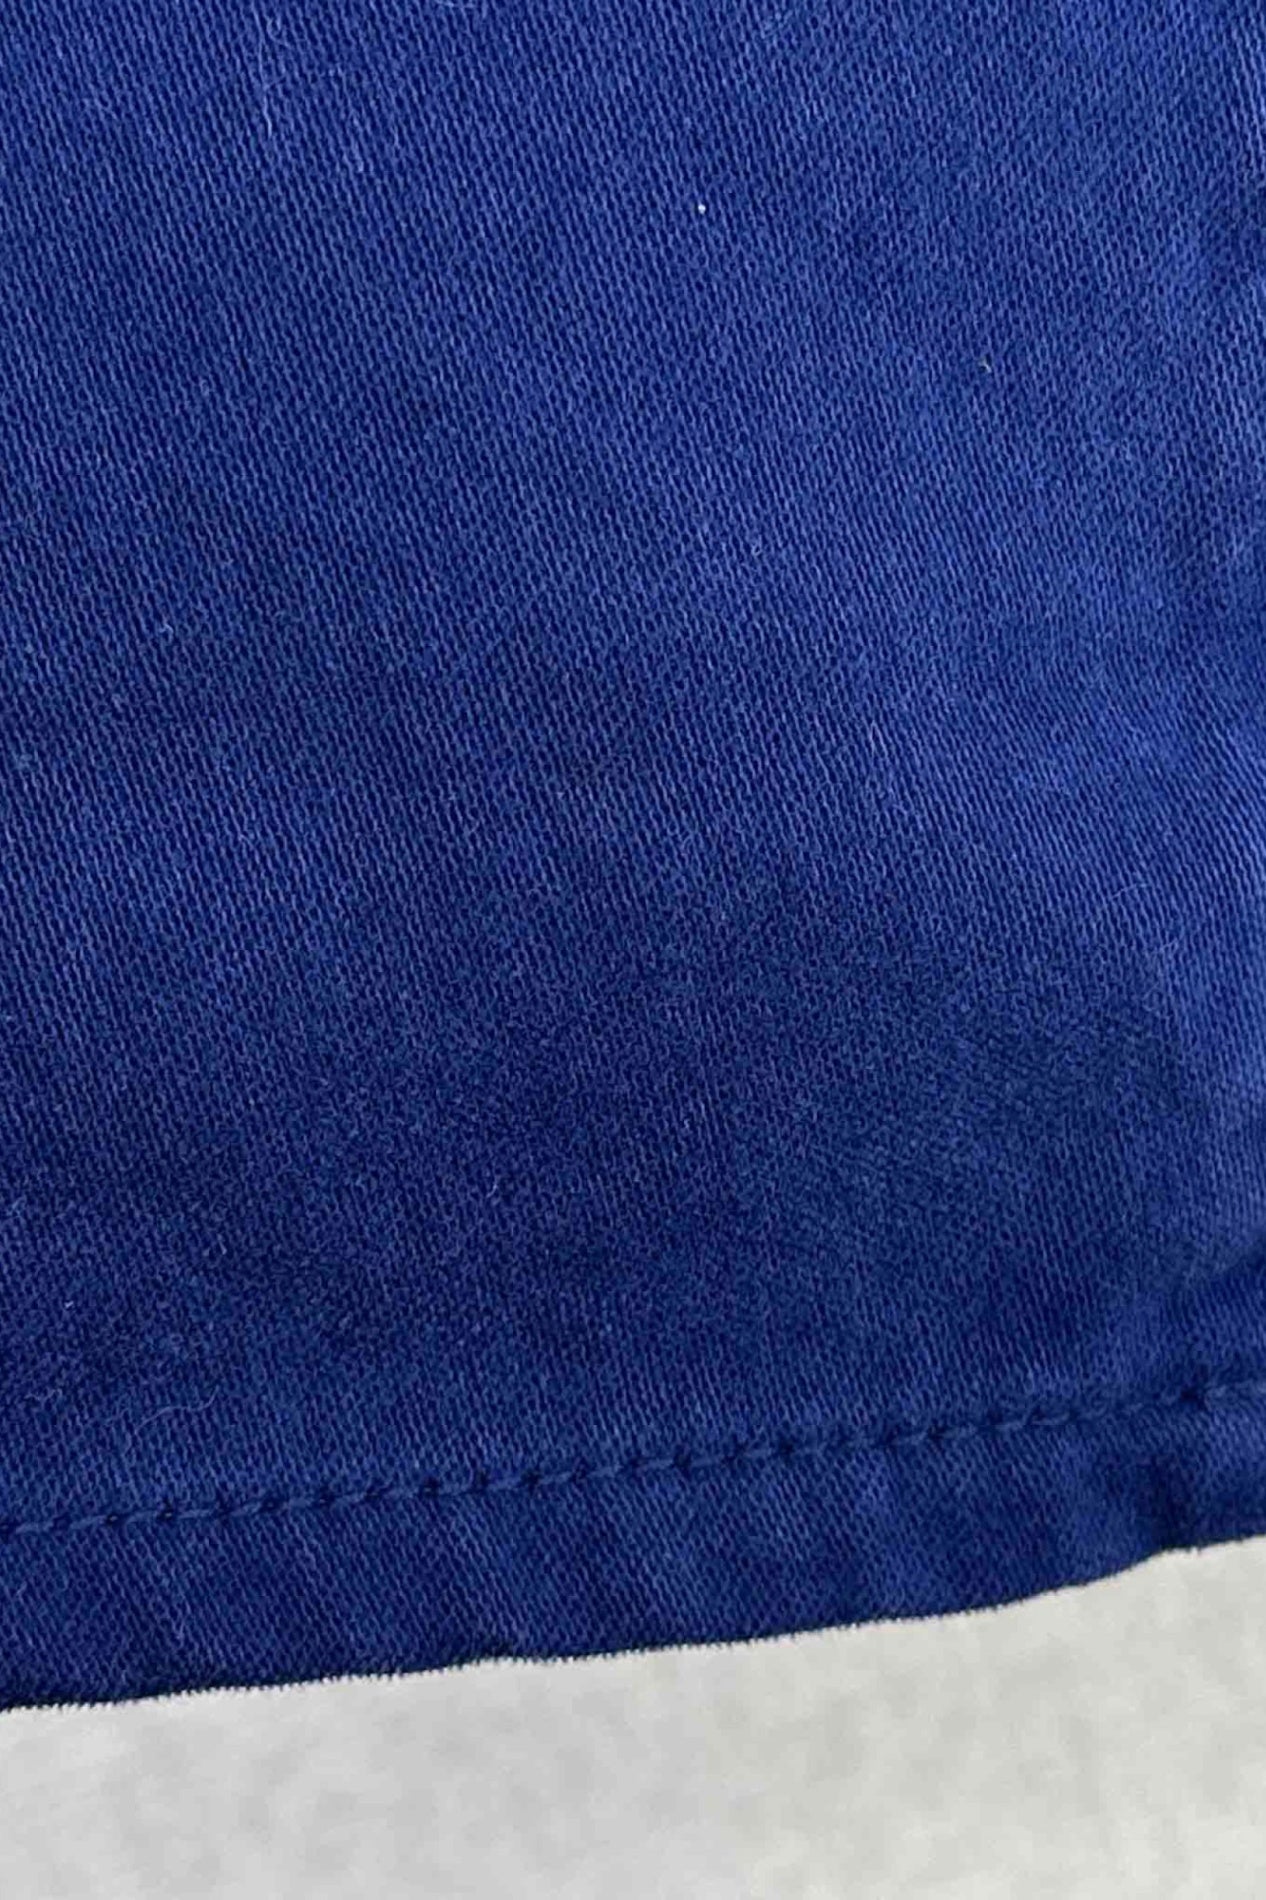 Made in ITALY REPLAY blue pants